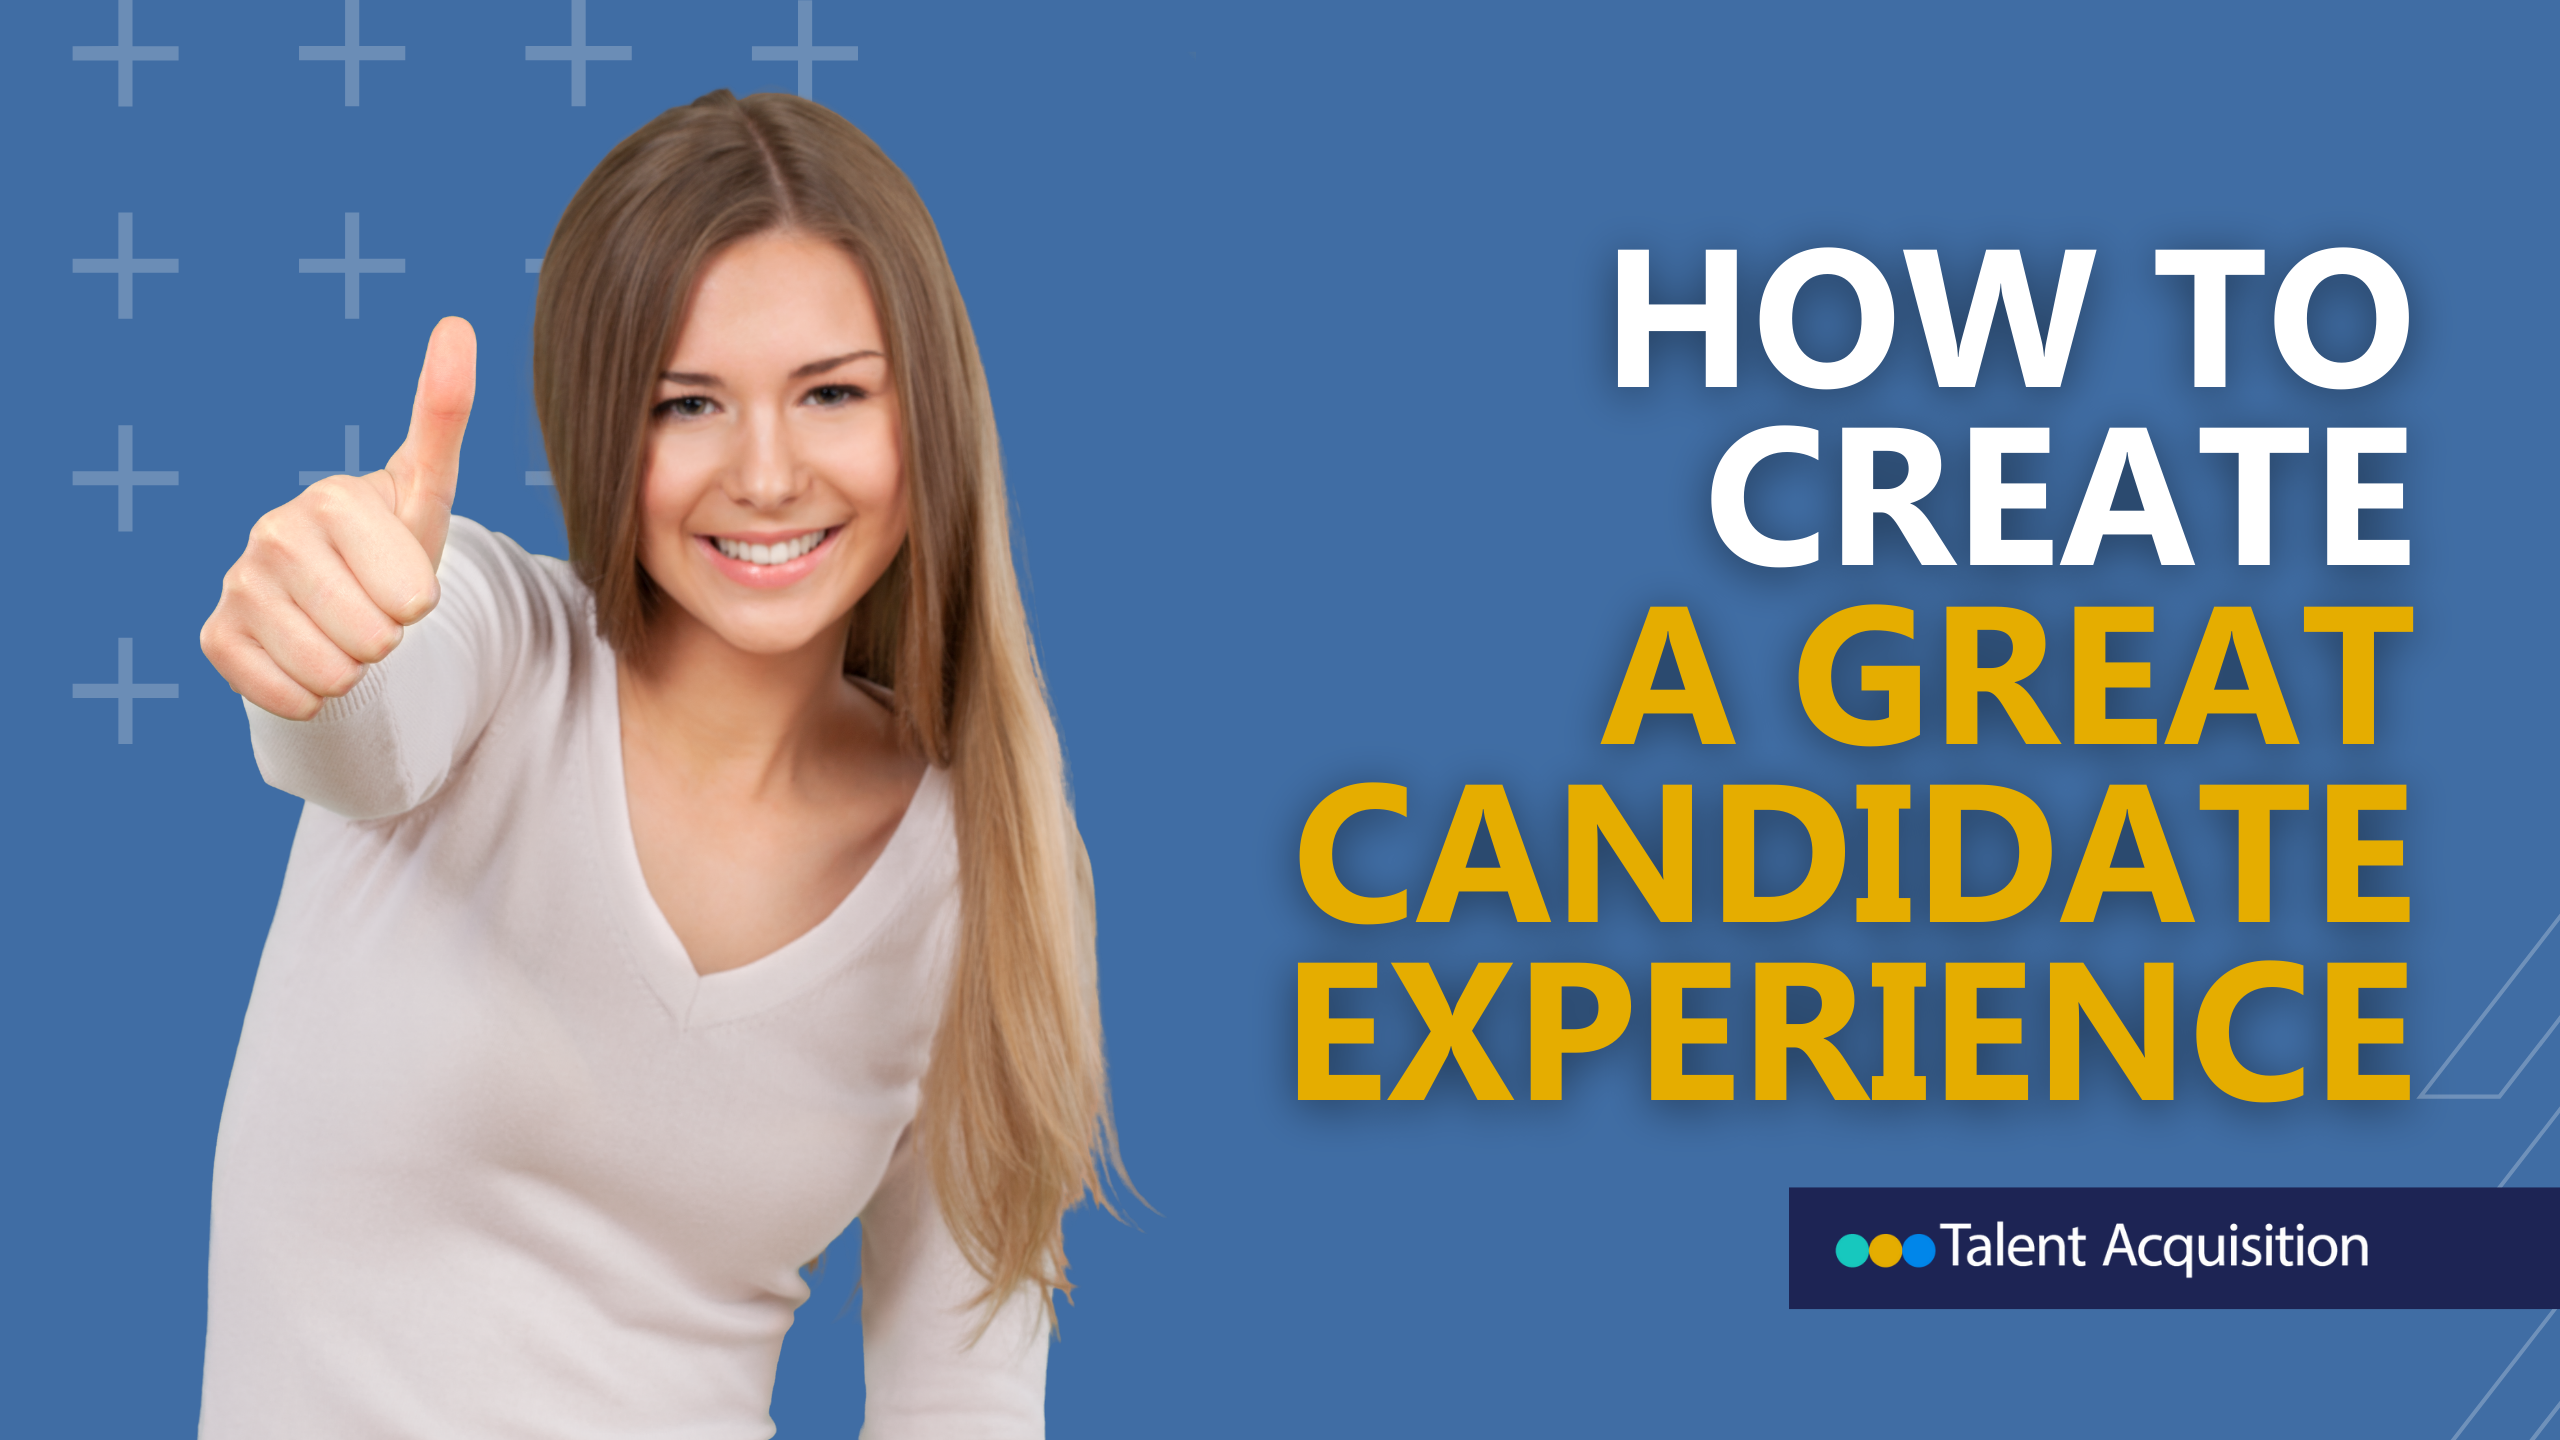 How to Provide a Great Candidate Experience